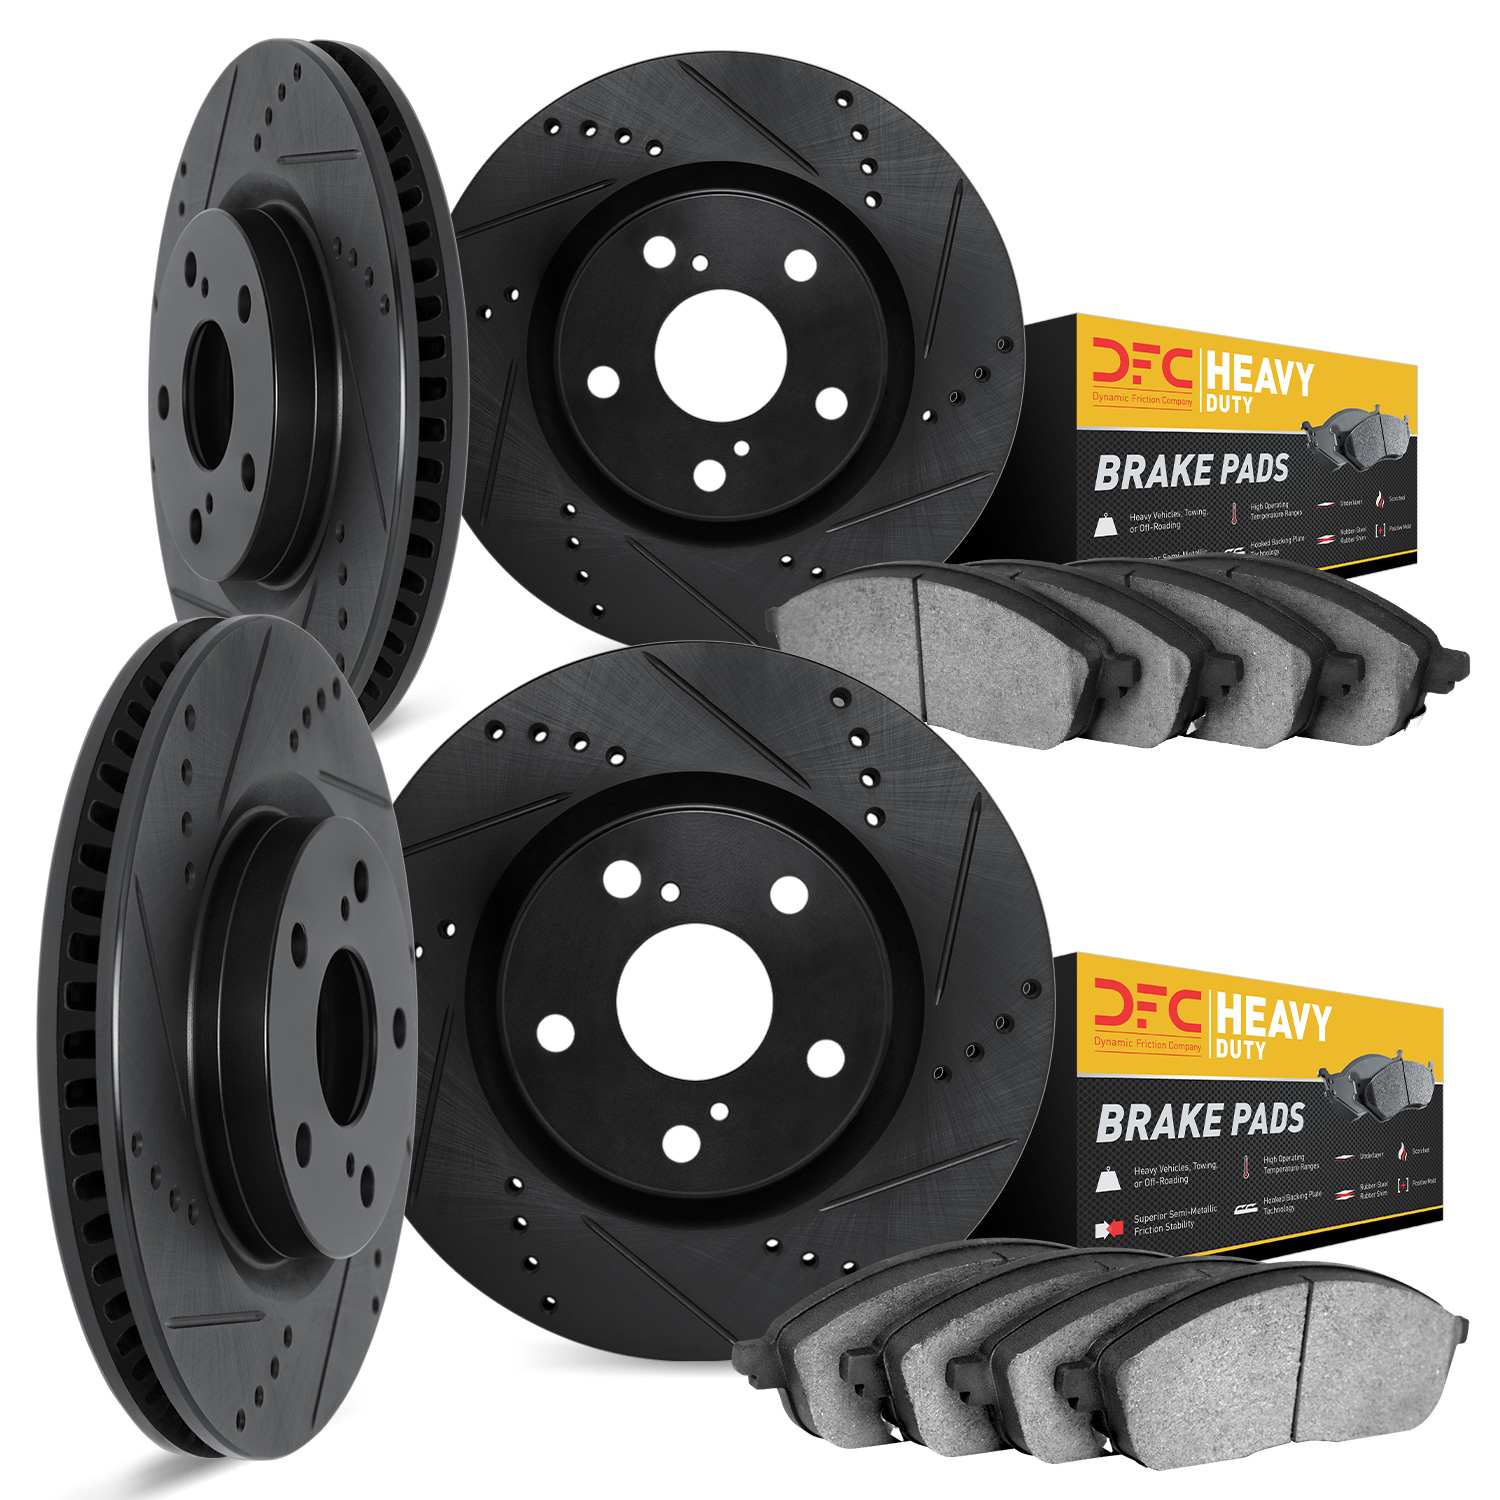 8204-39055 Drilled/Slotted Rotors w/Heavy-Duty Brake Pads Kit [Silver], Fits Select Mopar, Position: Front and Rear